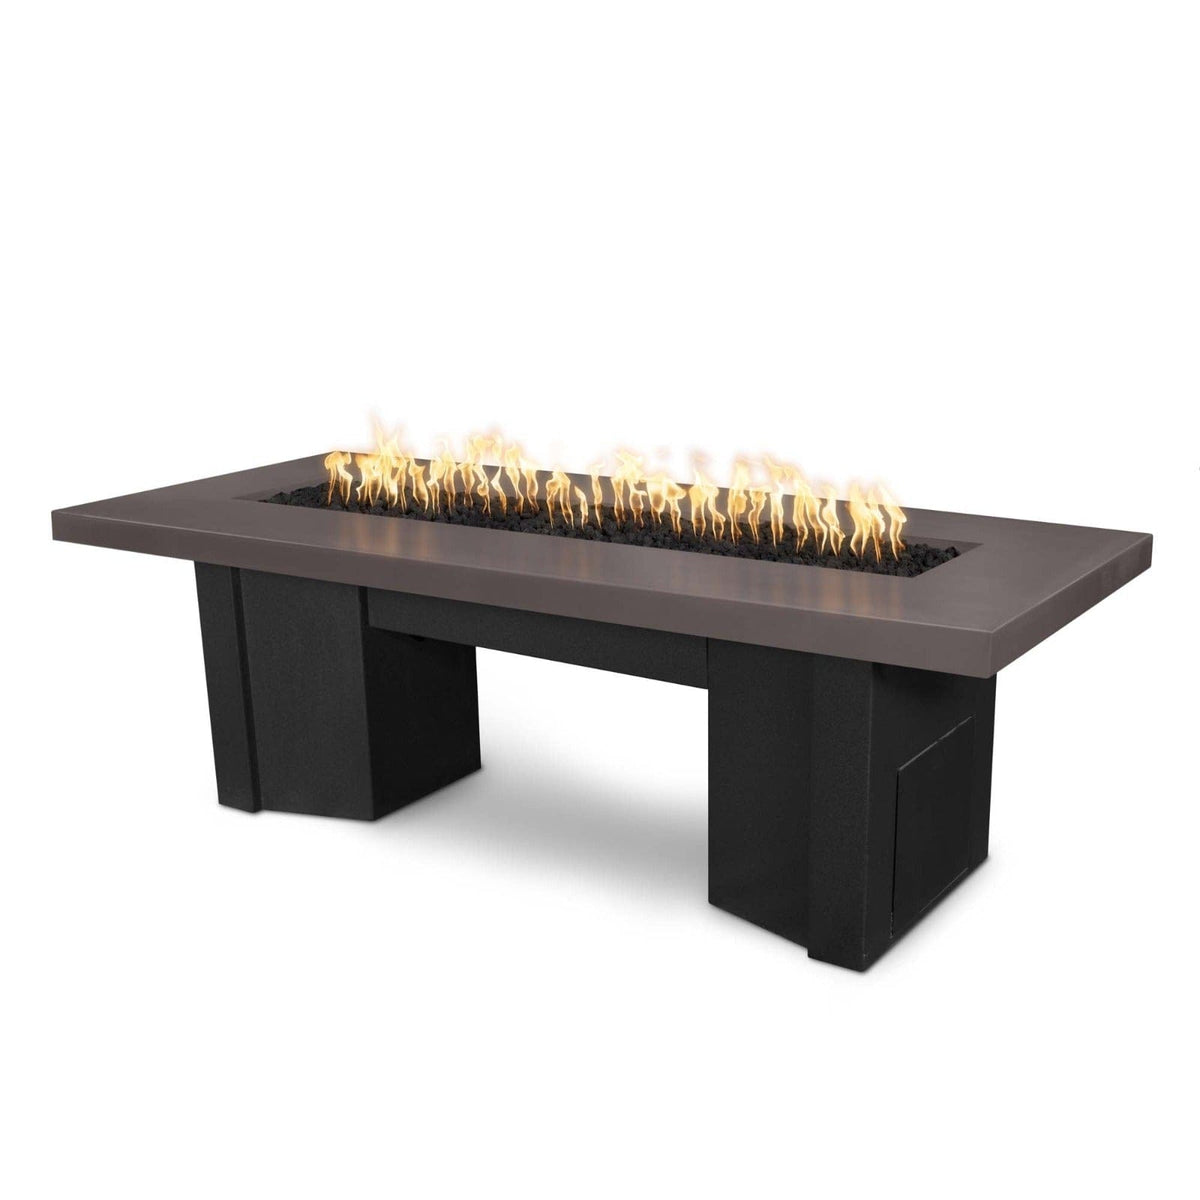 The Outdoor Plus Fire Features Chestnut (-CST) / Black Powder Coated Steel (-BLK) The Outdoor Plus 60&quot; Alameda Fire Table Smooth Concrete in Liquid Propane - Match Lit with Flame Sense System / OPT-ALMGFRC60FSML-LP